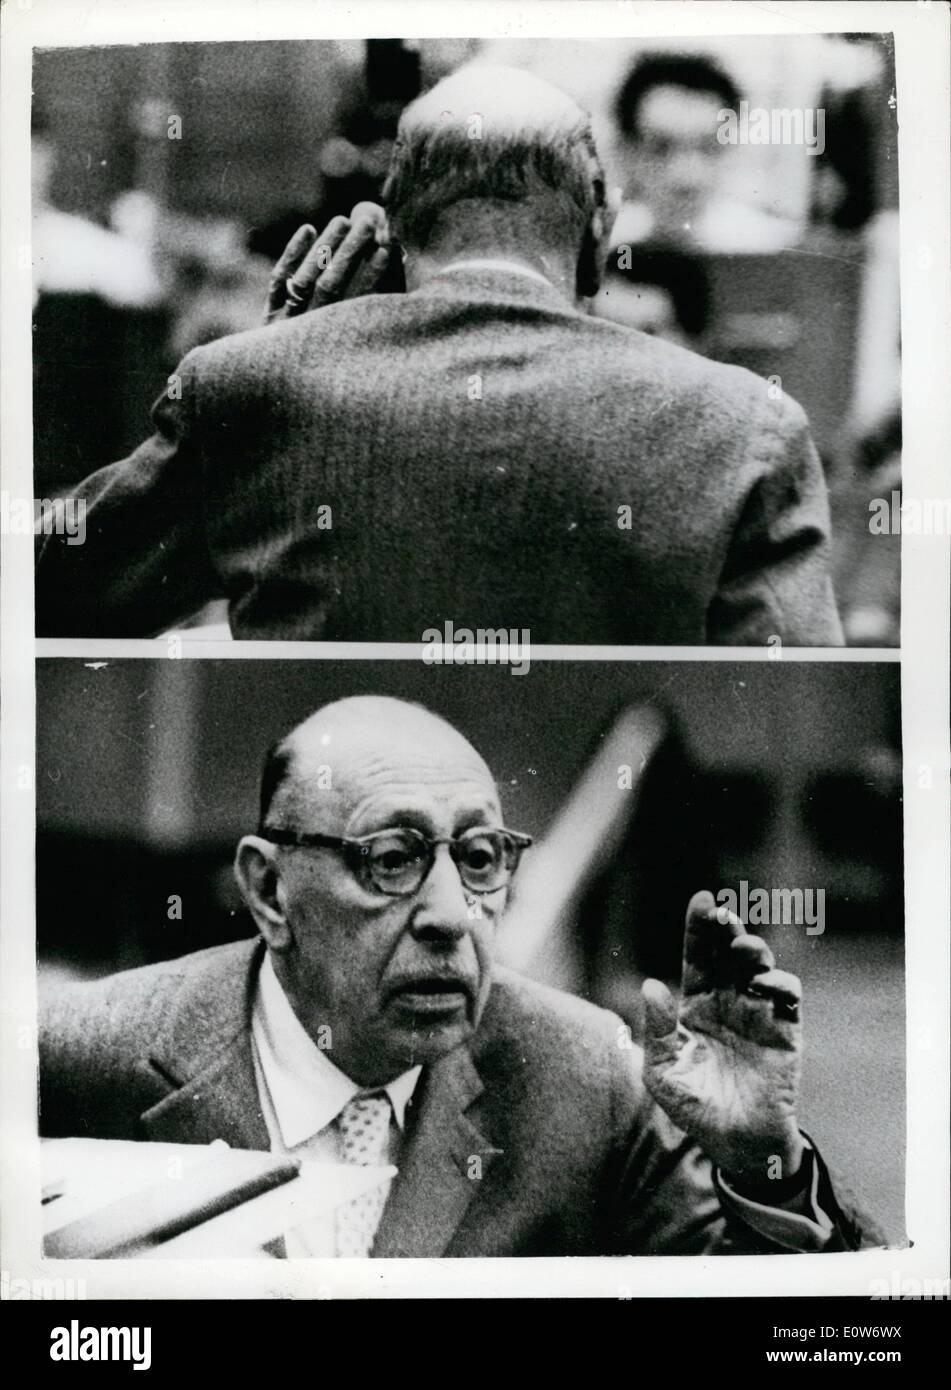 Oct. 10, 1961 - The man with an ear for music - Igor Stravinsky rehearses the b.b.c symphony orchestra : The world's greatest living composer, 79-year-old Igor Stravinsky, the man who in 50 years has heard his music dismissed and condemned, accepted and acclaimed, was busy yesterday listening critically to a rehearsal by the b.b.c. symphony orchestra. The festival hall will be packed with celebrities fro the master's concert on Sunday. photo shows Two studies of Igor Stravinsky as (top) he cups his hand to his car-and below listens to the b.b.c Stock Photo